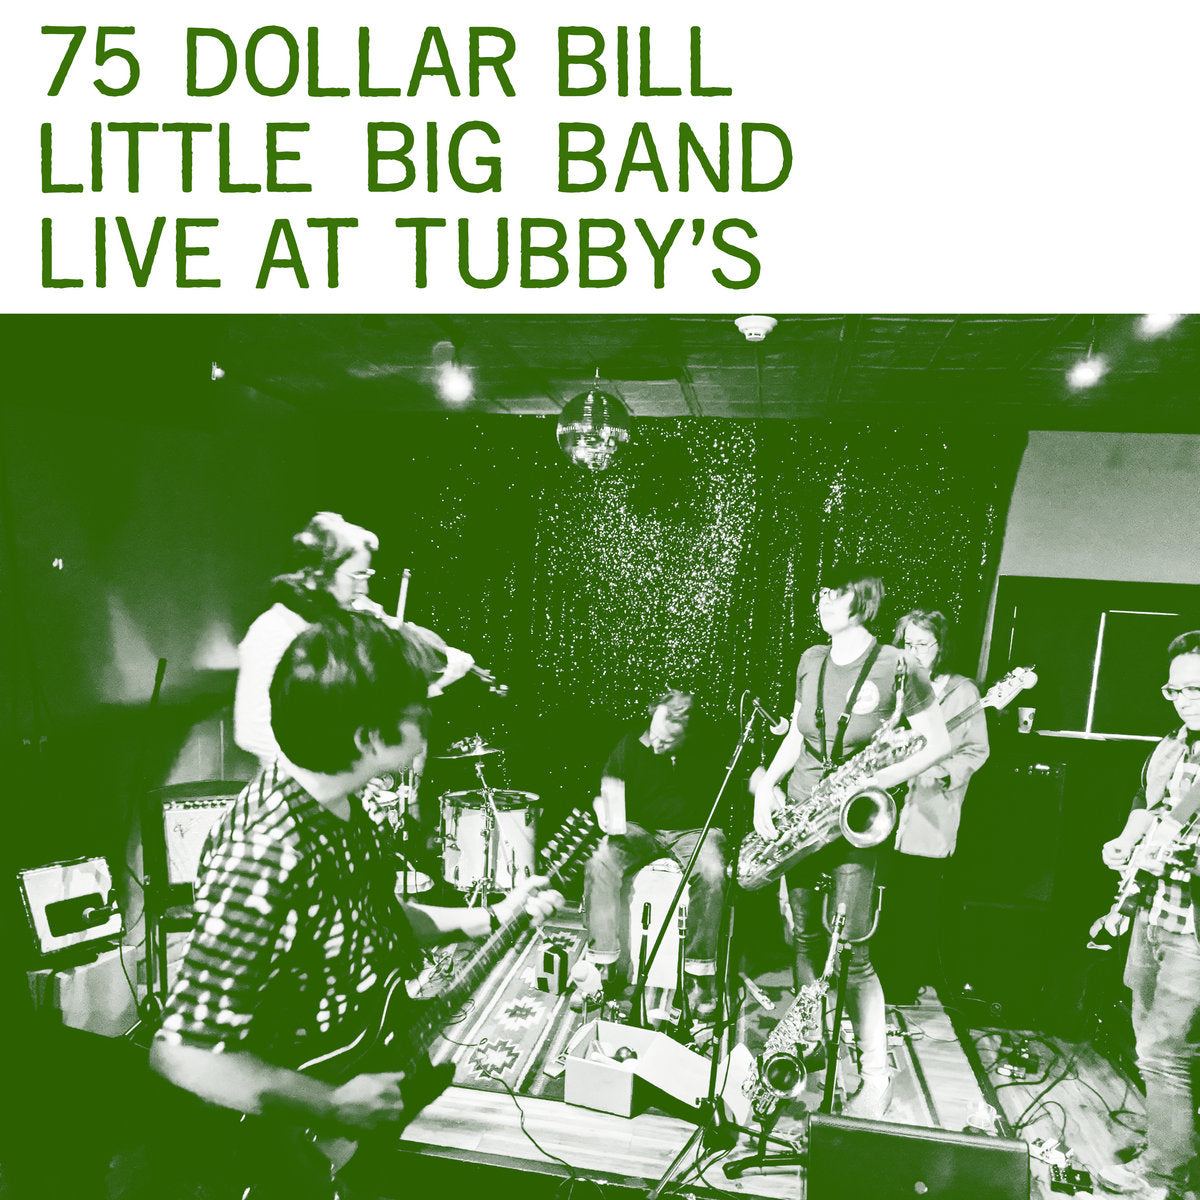 Arcade Sound - 75 Dollar Bill Little Big Band - Live at Tubby's - 2xLP image